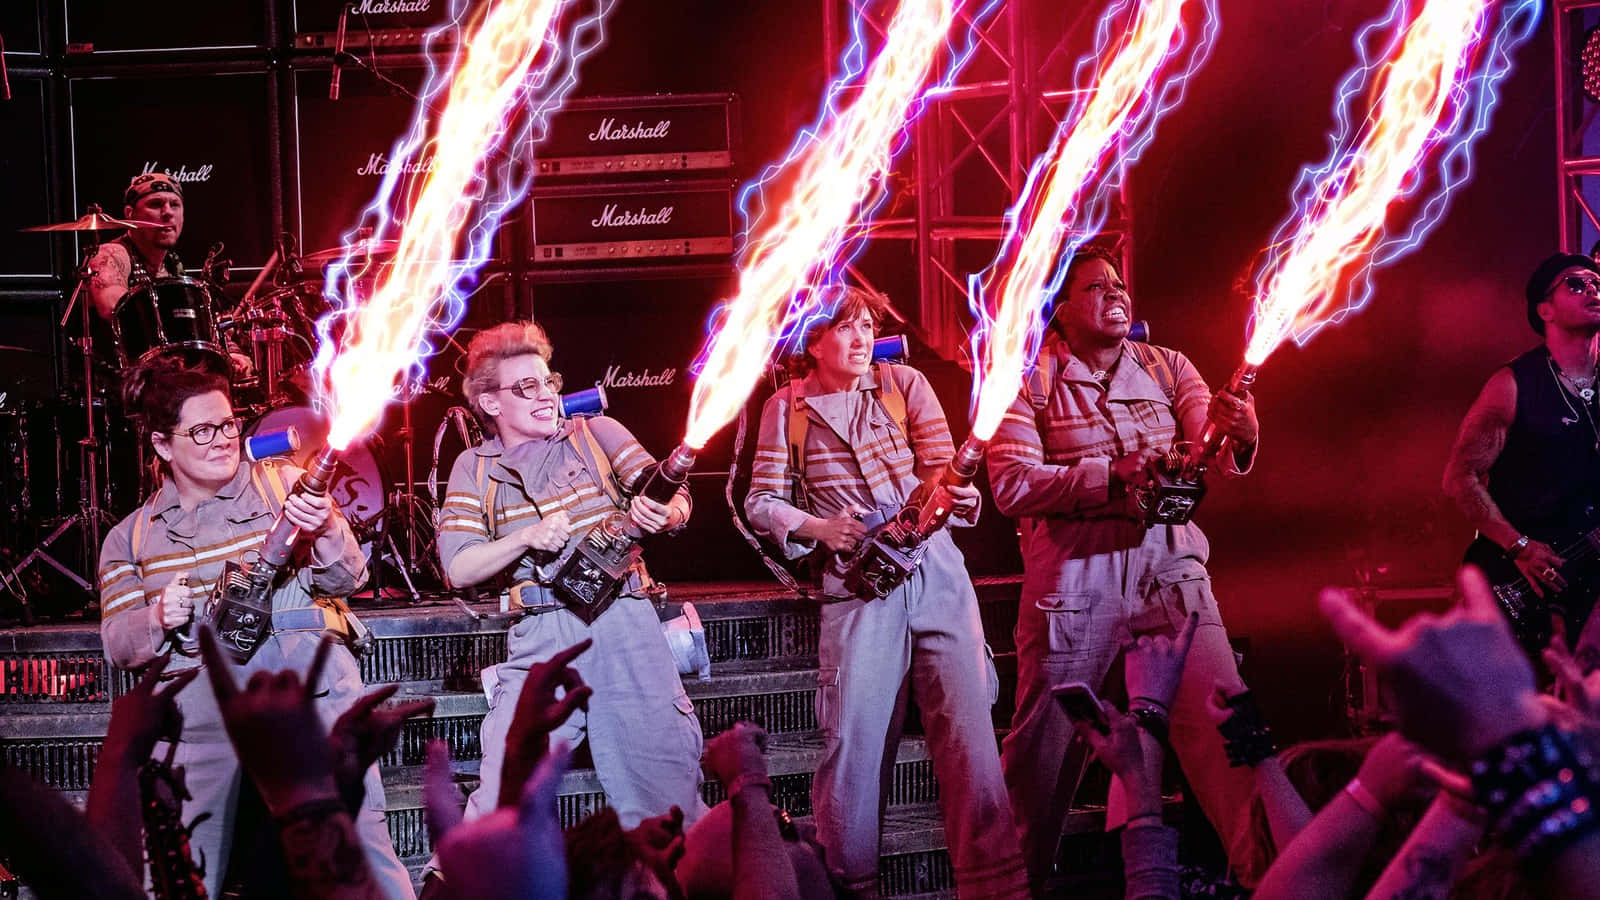 The Ghostbusters team in action